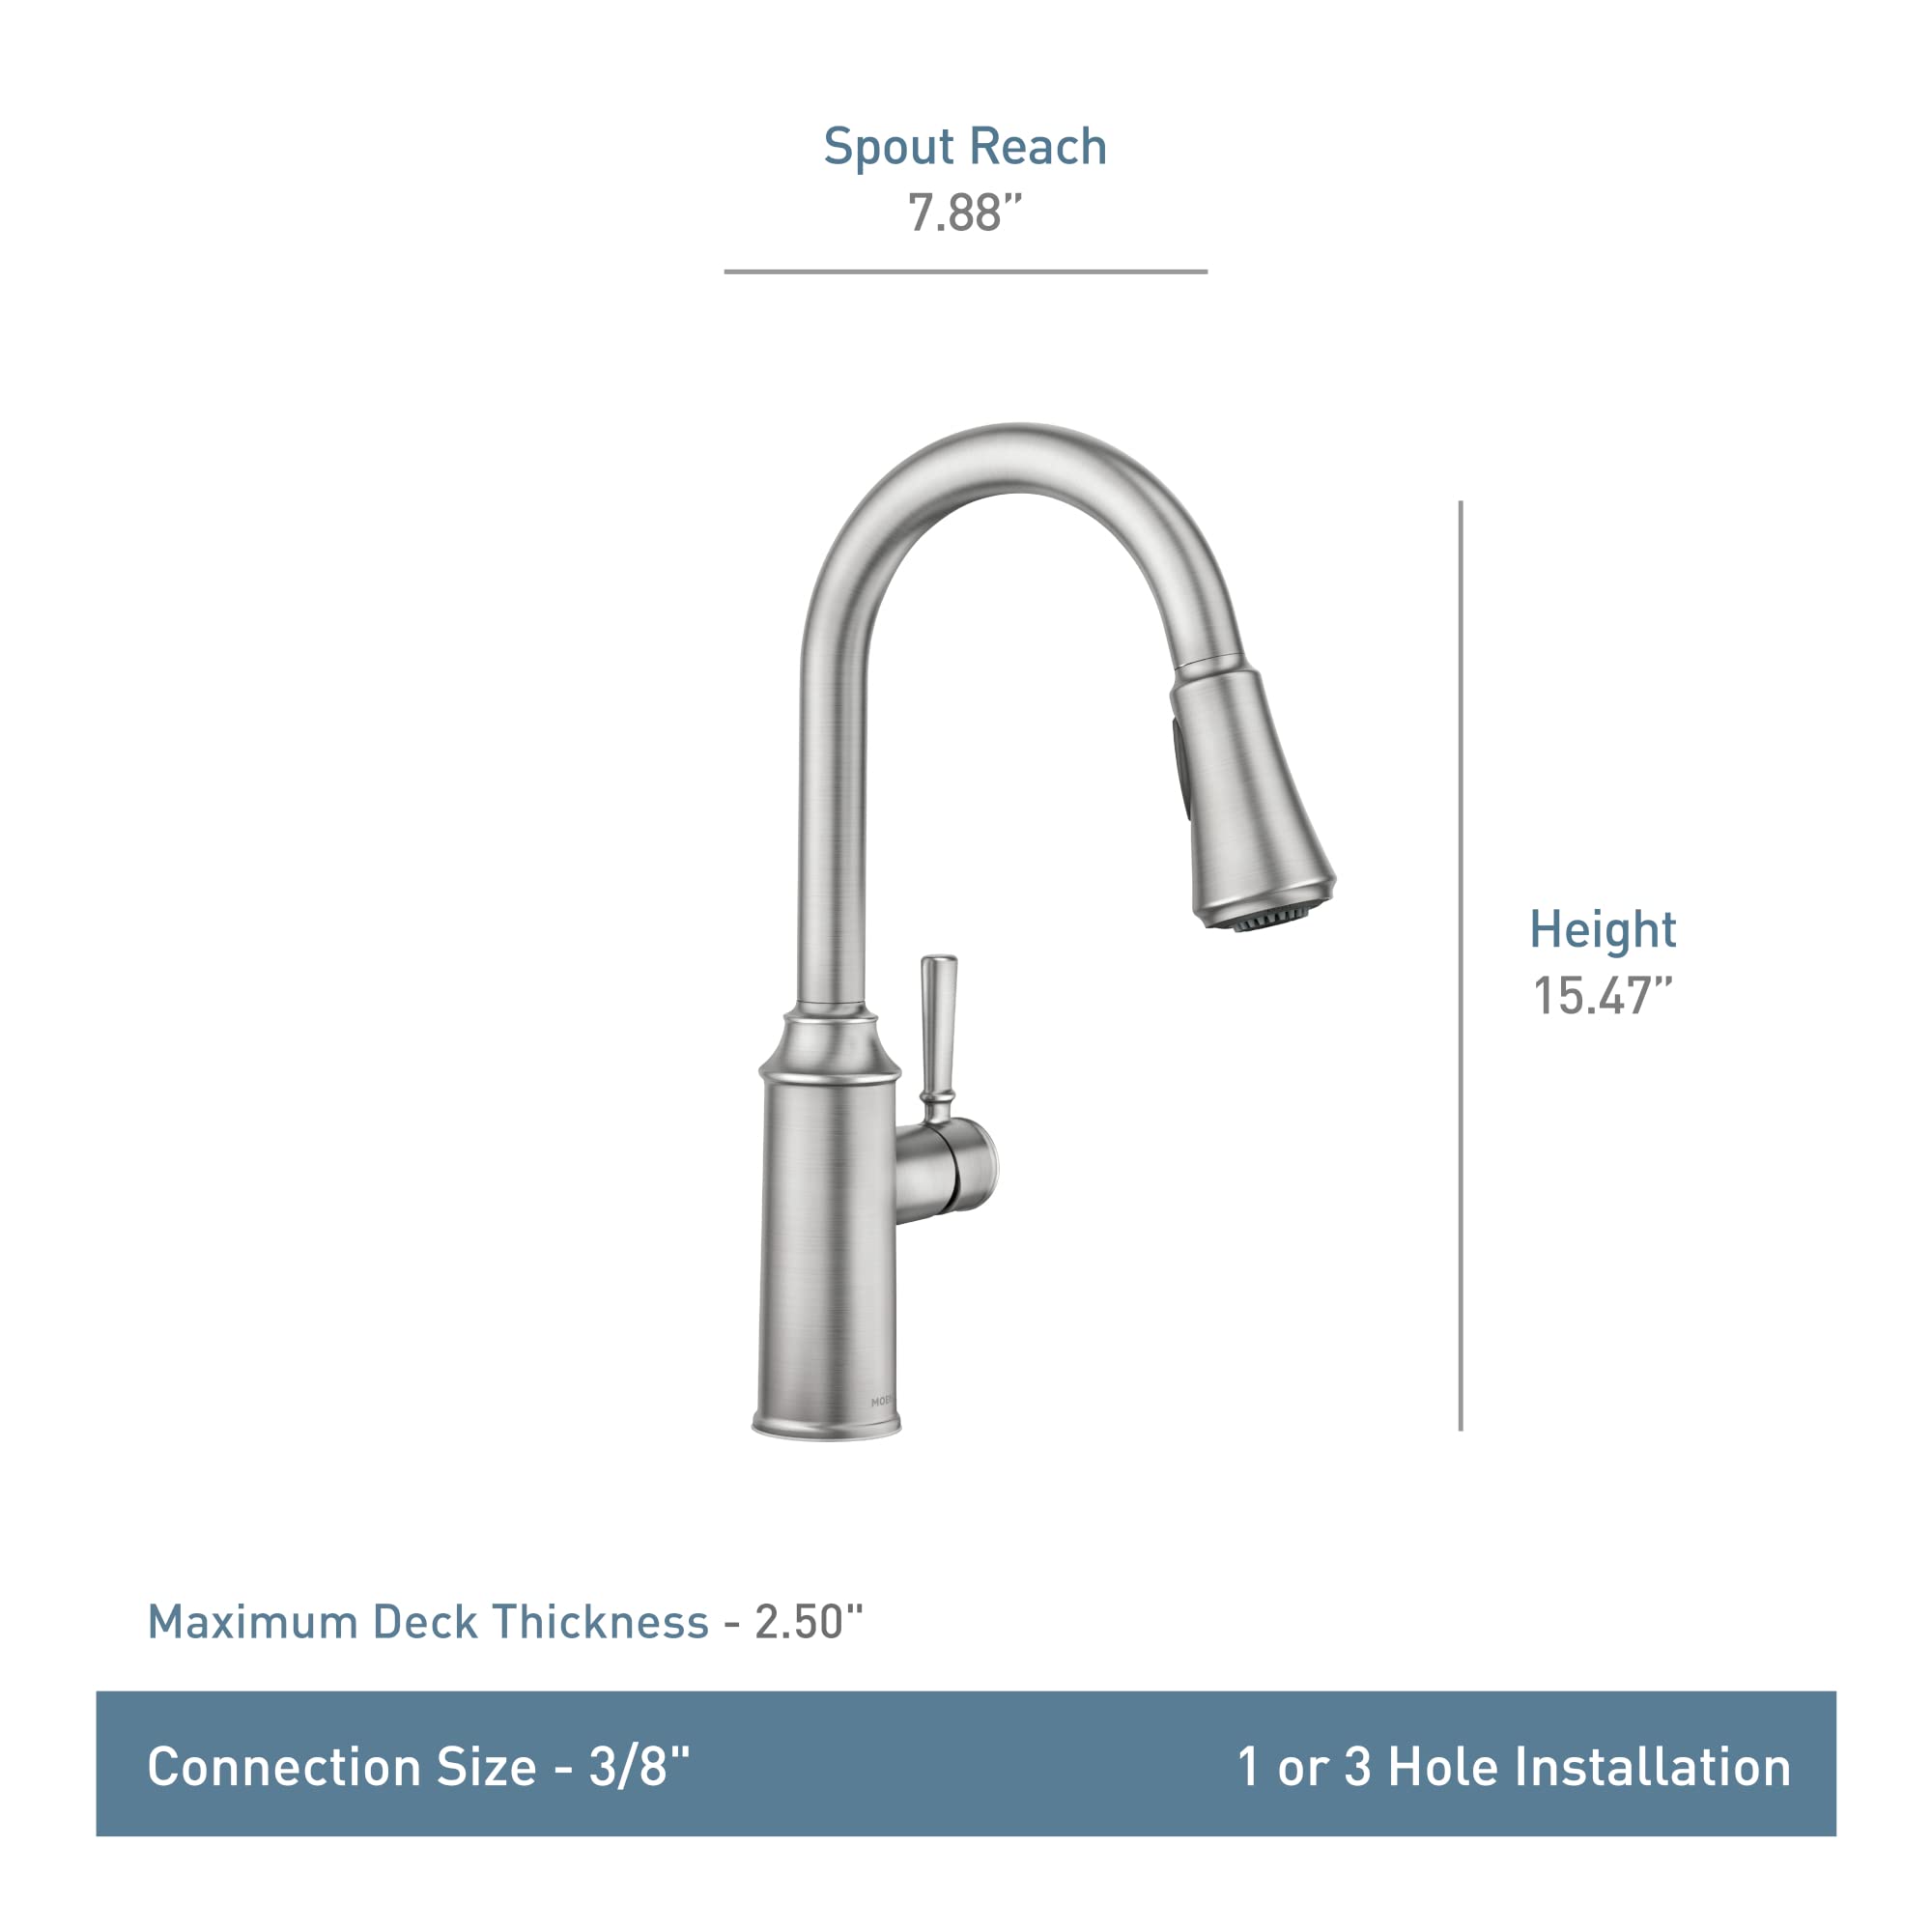 Moen Conneaut Spot Resist Stainless One-Handle High Arc Kitchen Sink Faucet with Power Boost for a Faster Clean, Kitchen Faucet with Pull Down Sprayer, 87801SRS